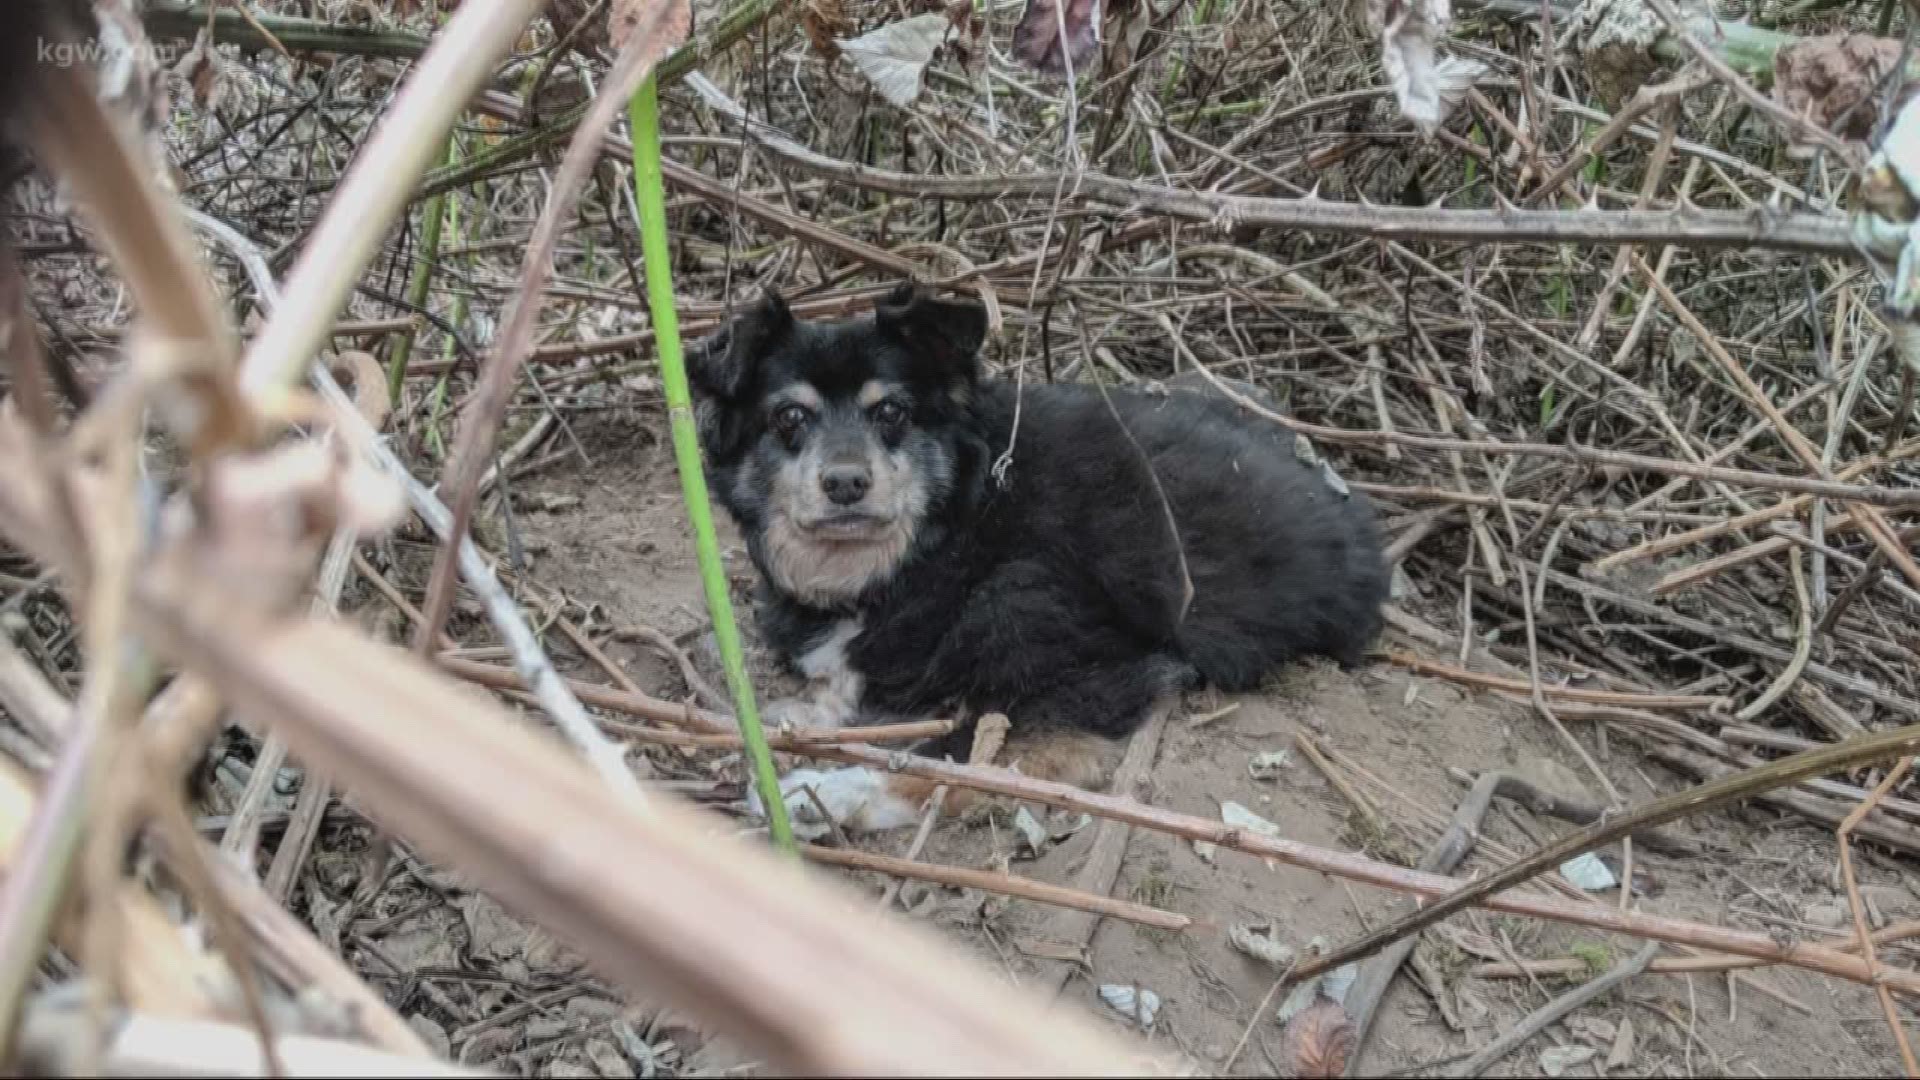 A dog stranded on a steep hillside in Canby for about six to eight days was rescued on Monday, according to the Oregon Humane Society.